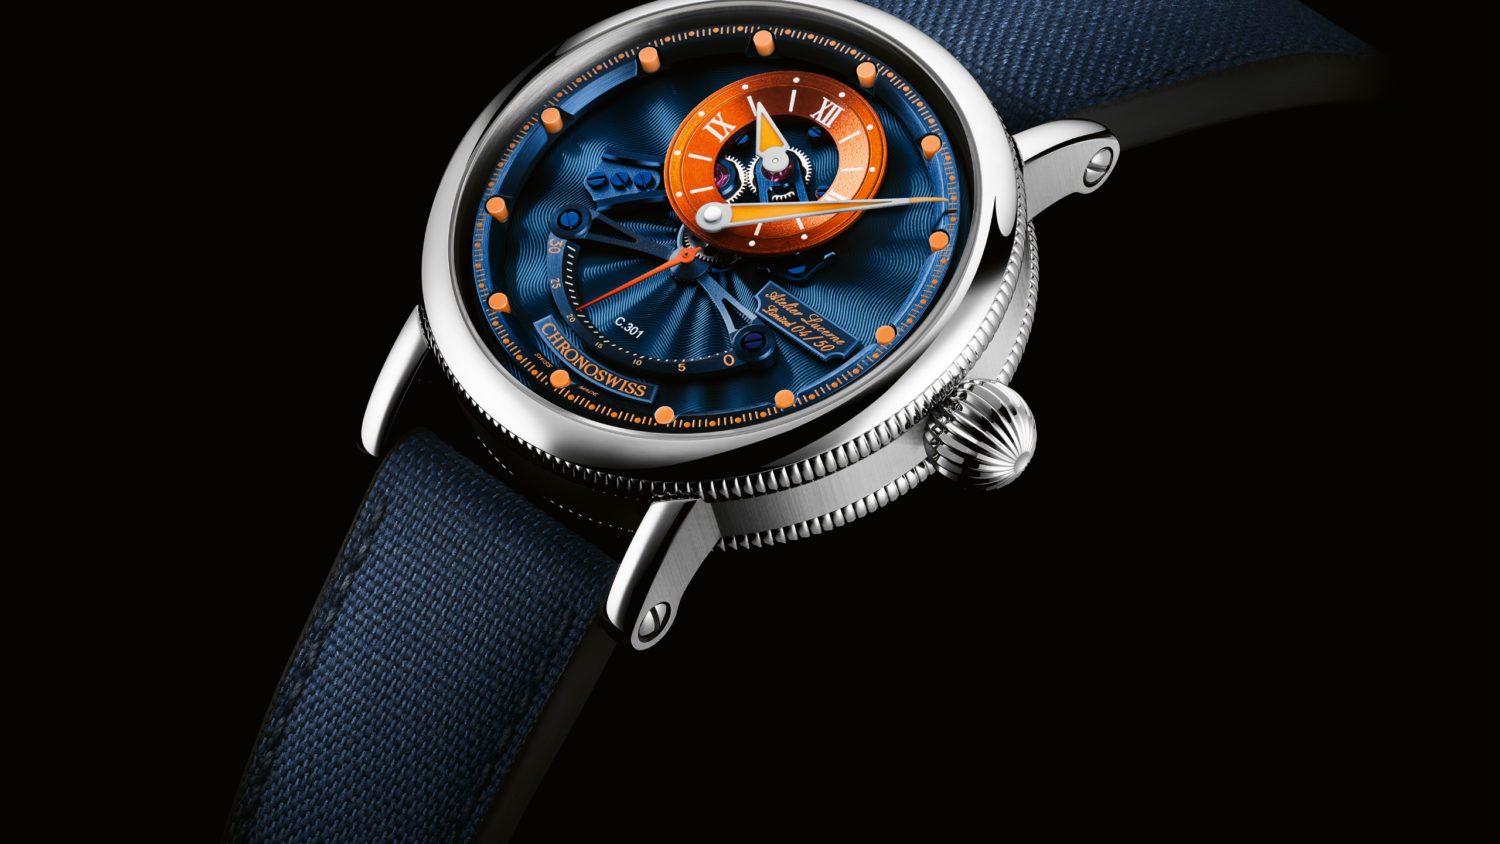 Strong, dramatic colours – and unforgettable names – have become part of the identity of Chronoswiss limited edition regulators.